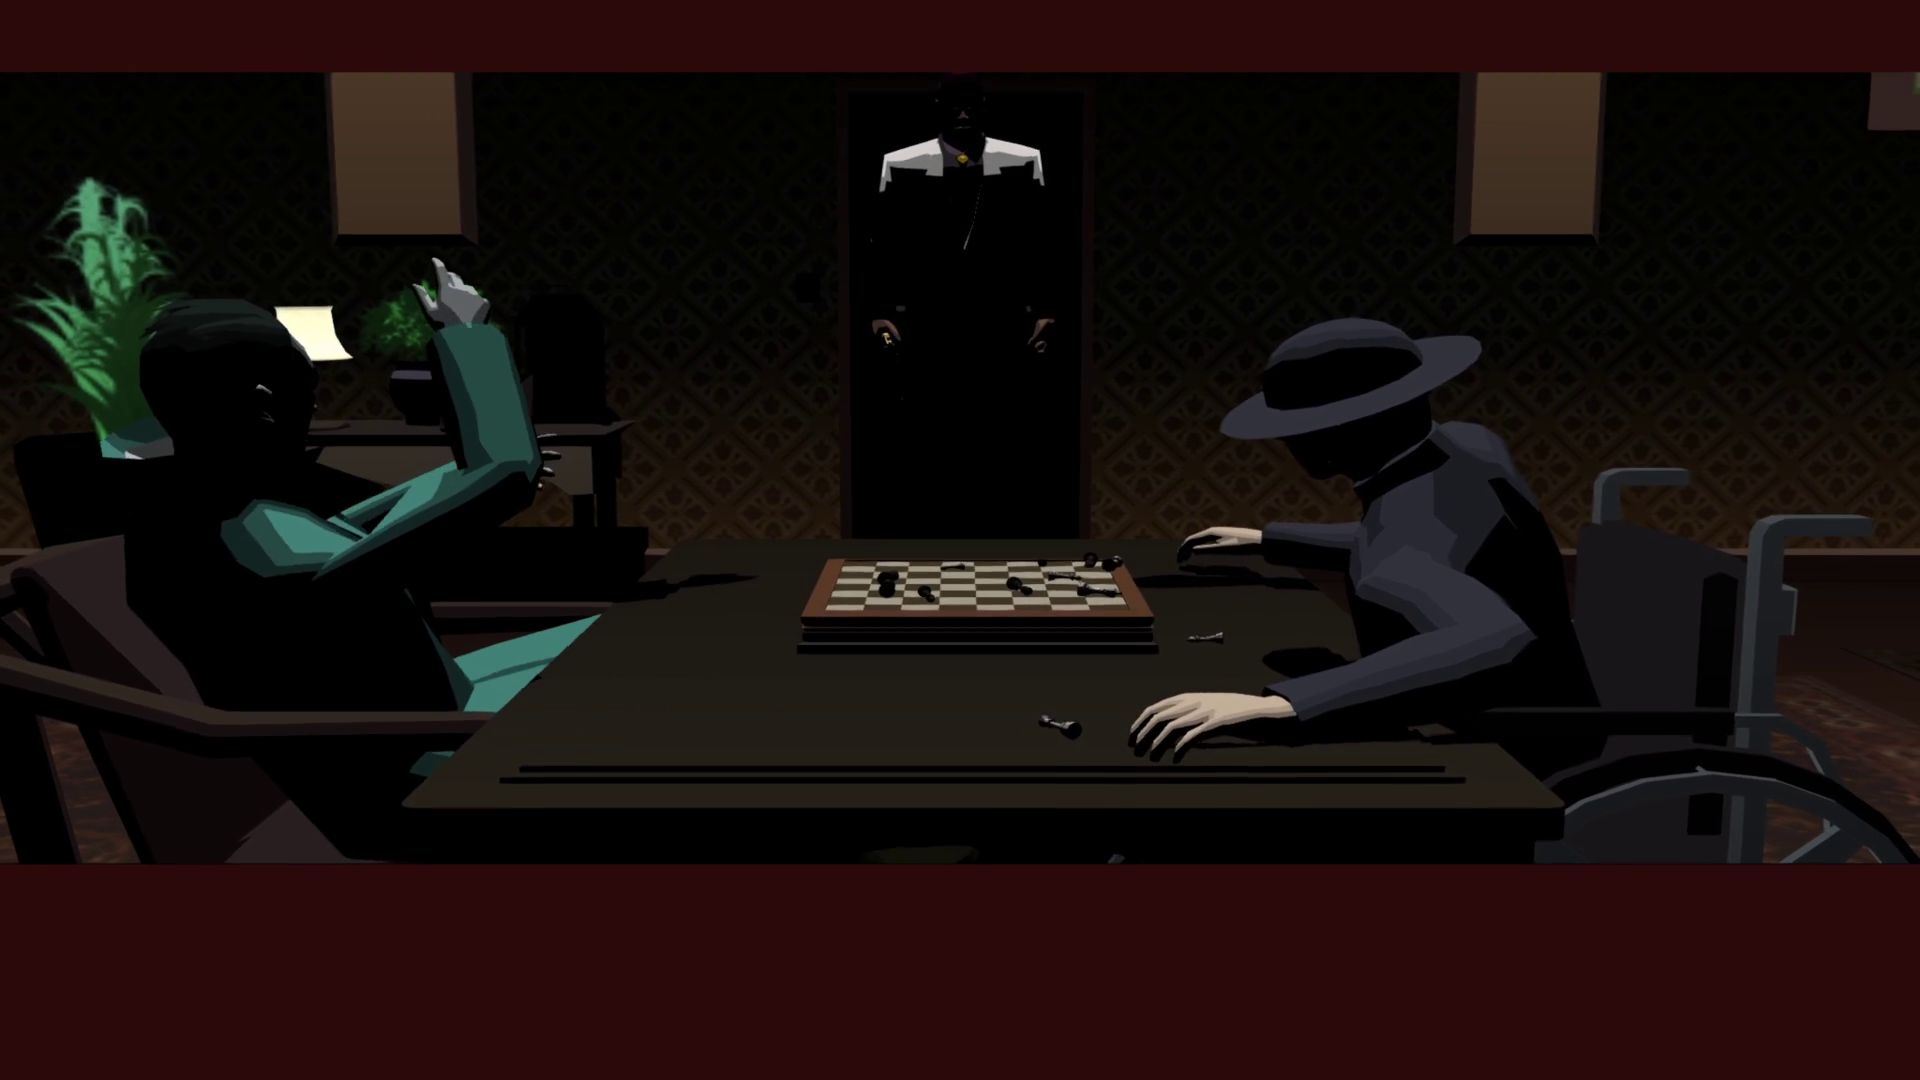 Screenshot from "Smile." Kun Lan sits on the left side, and Harman on the right. The shot centers on a black doorway, in which Emir stands, covered in shadow, wearing a white suit and holding the Golden Gun. Harman and Kun are panicking, turned toward Emir. Their chess game is upset, the pieces fallen.